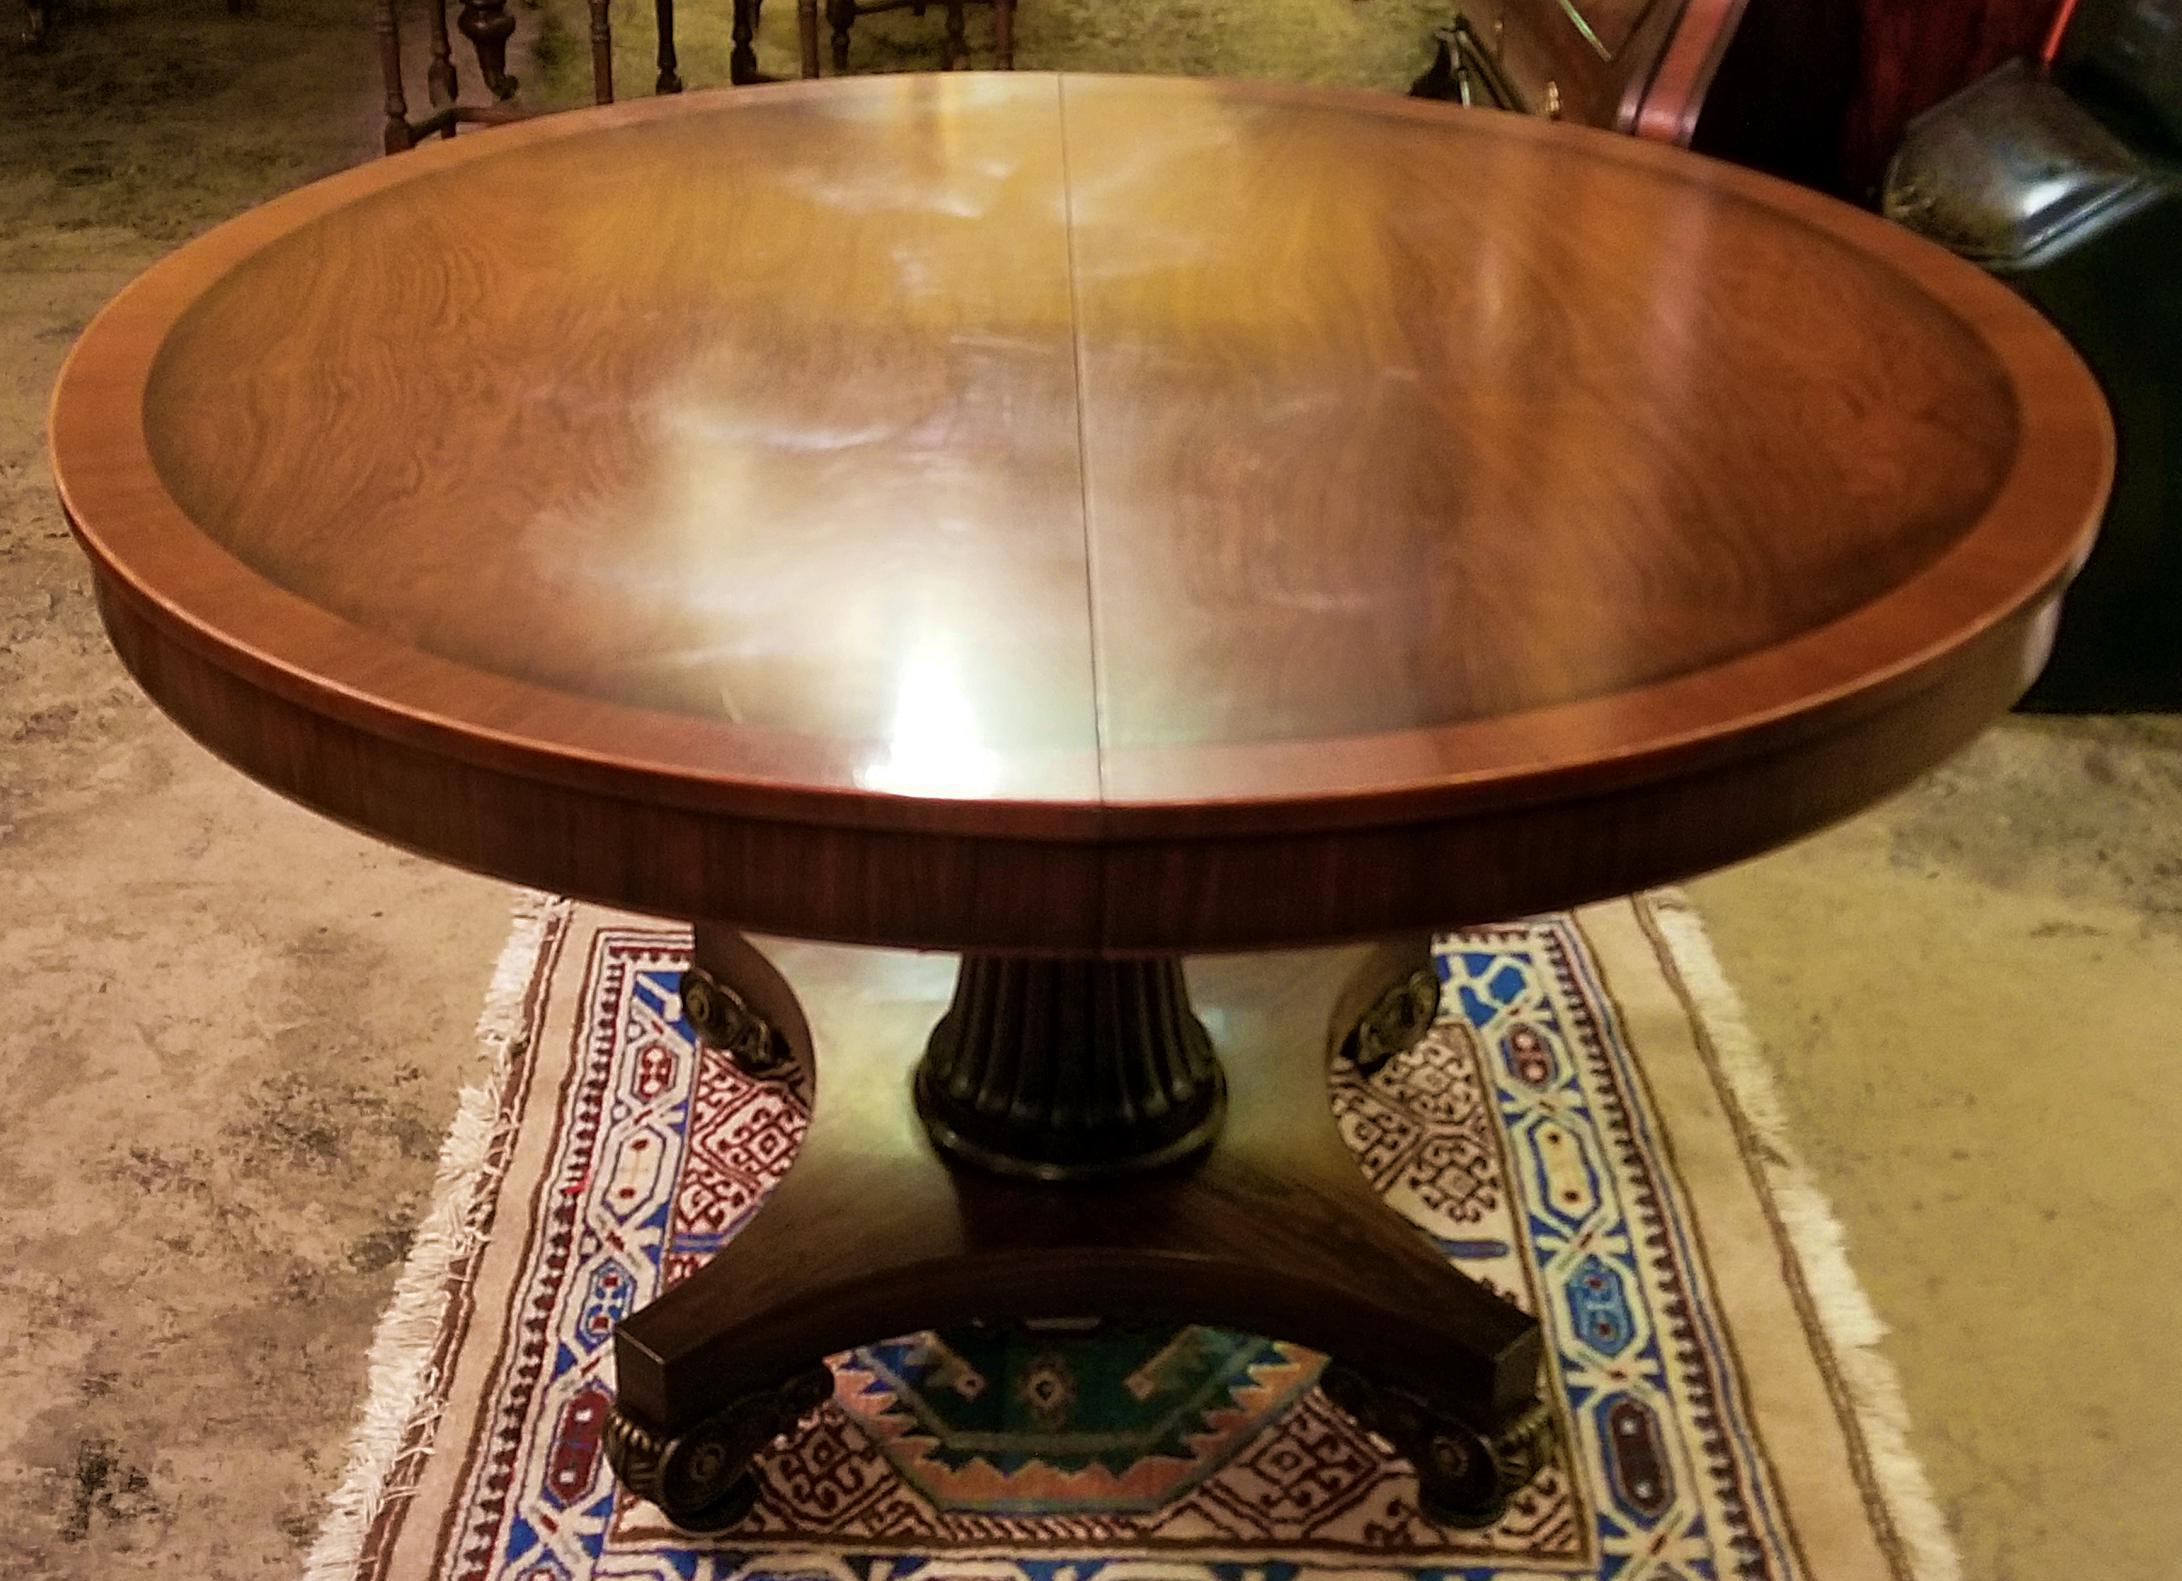 Presenting a beautiful late 19th century American mahogany extendable dining or center table.

From circa 1890 this table is made from high quality mahogany veneer with boxwood edging. It comes with an additional 3 leafs that can be inserted to